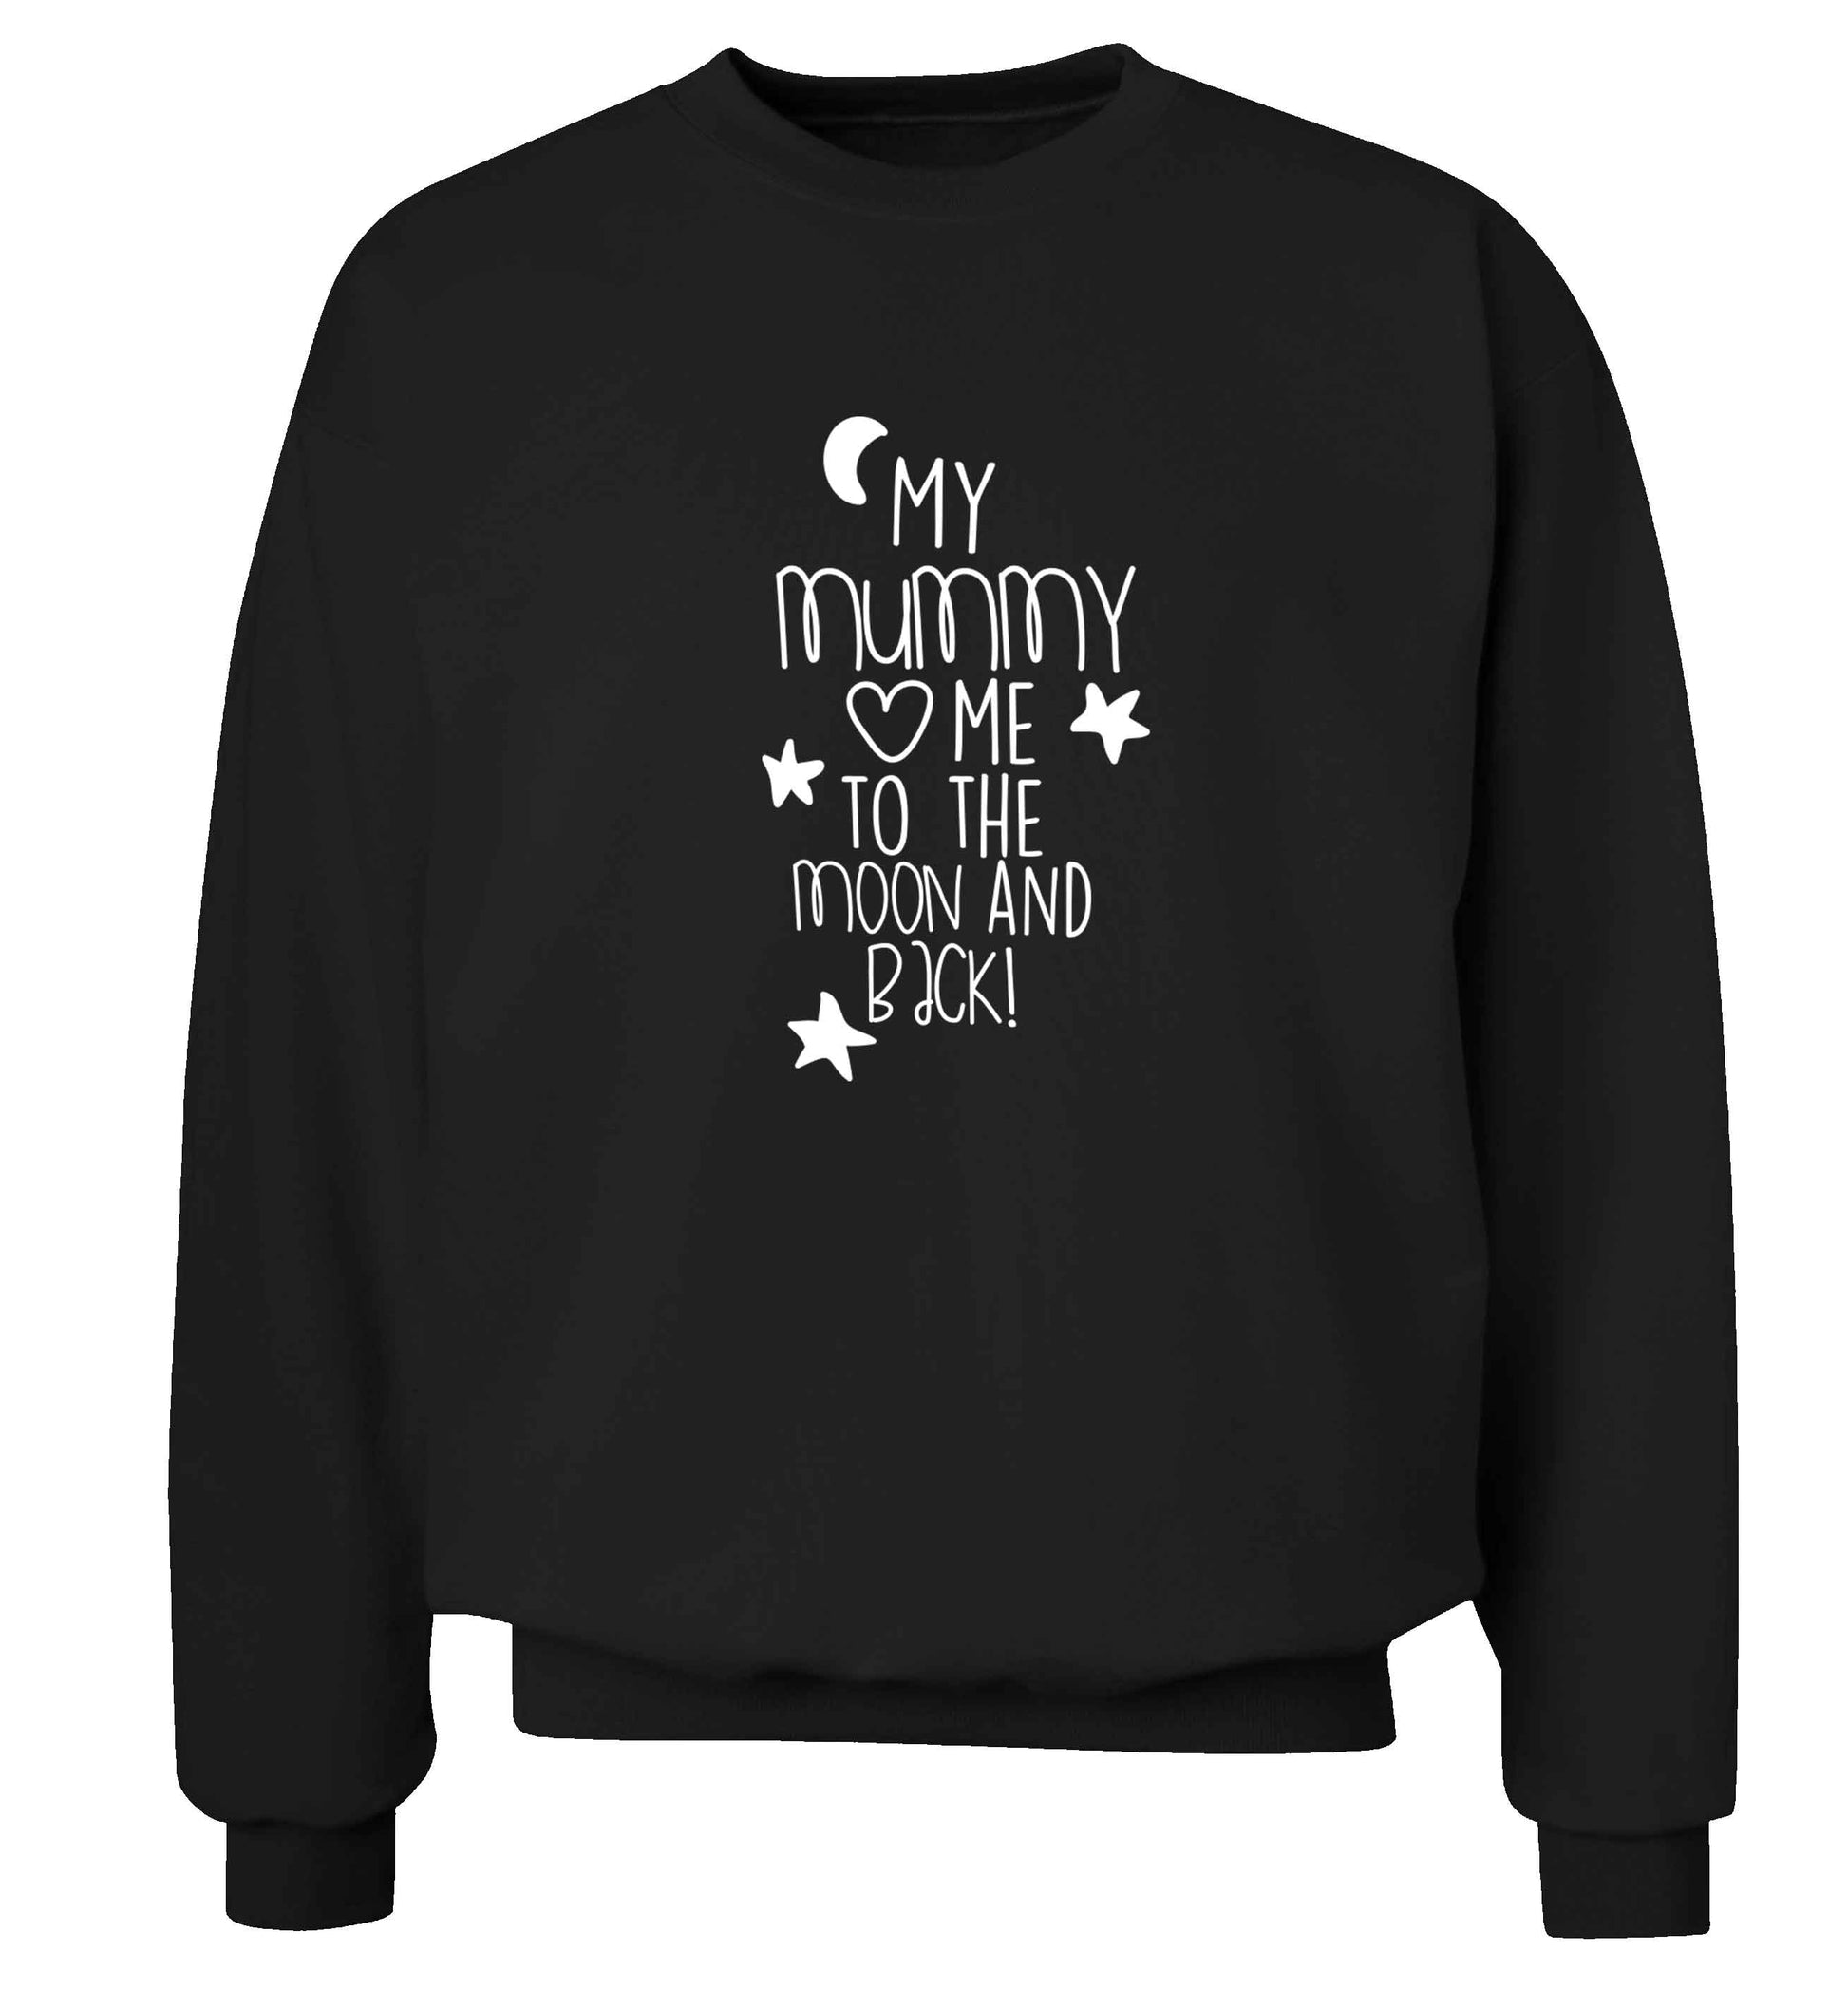 My mum loves me to the moon and back adult's unisex black sweater 2XL